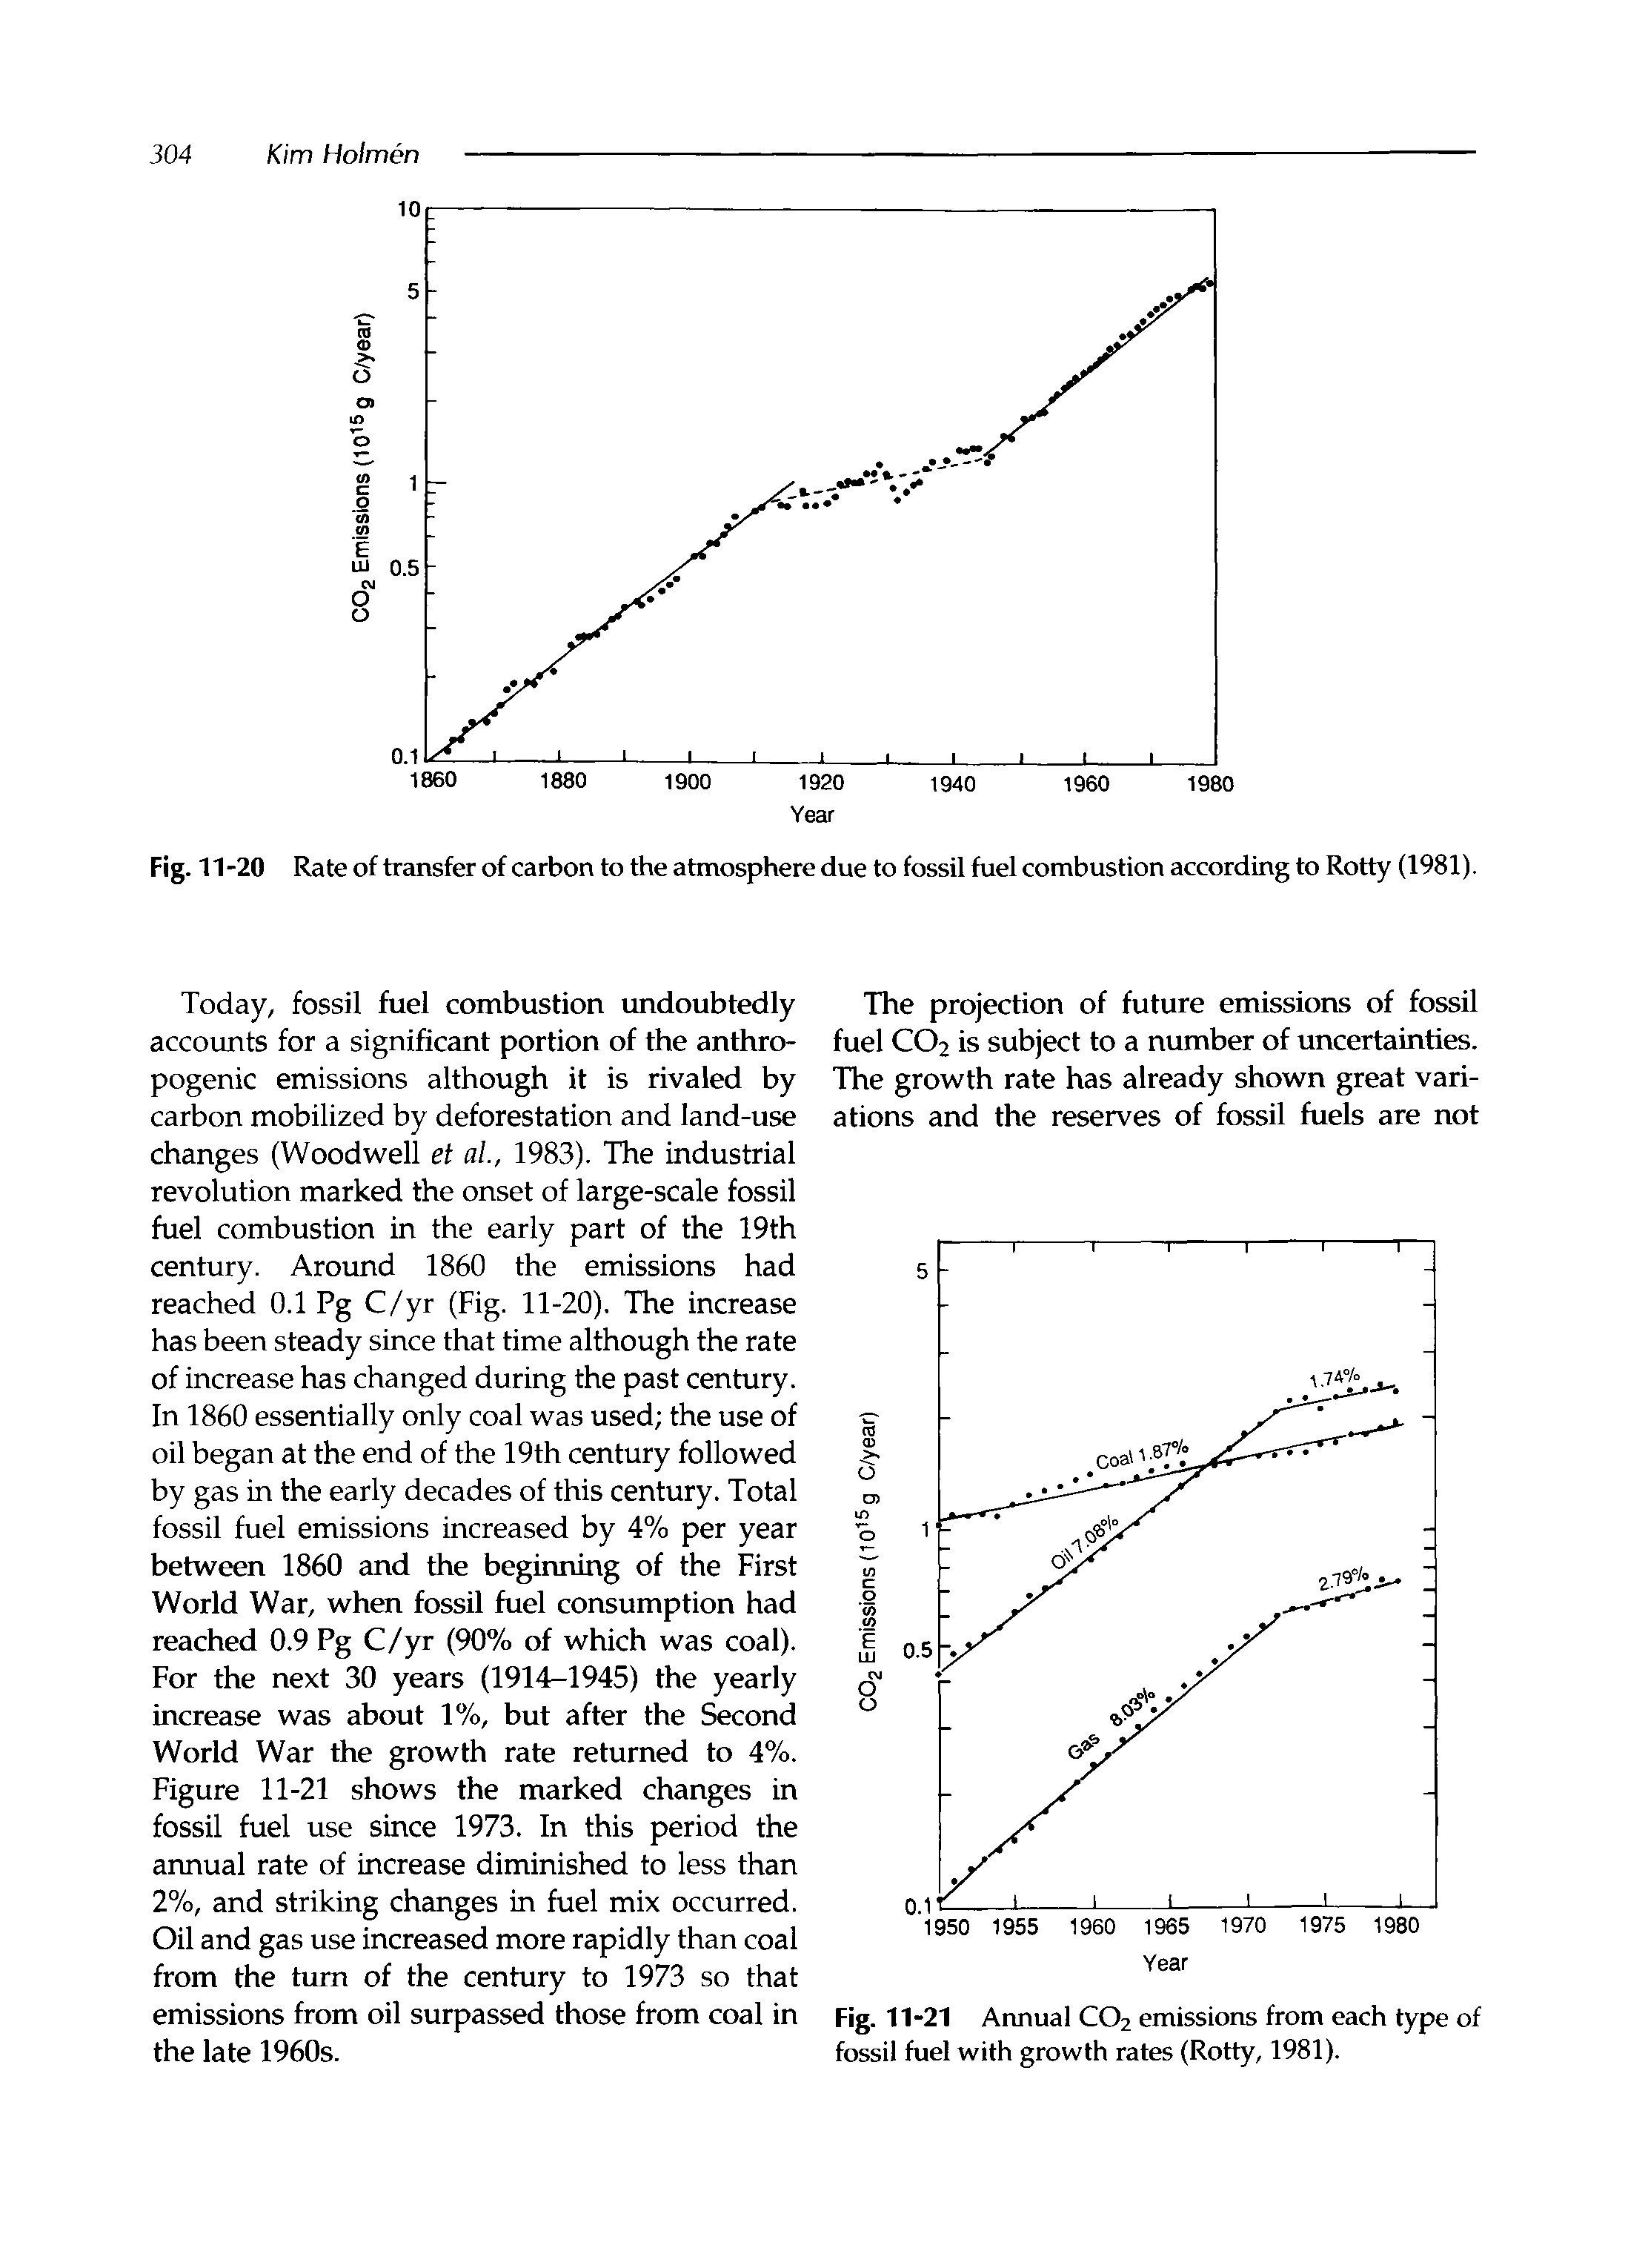 Fig. 11-21 Annual CO2 emissions from each type of fossil fuel with growth rates (Rotty, 1981).